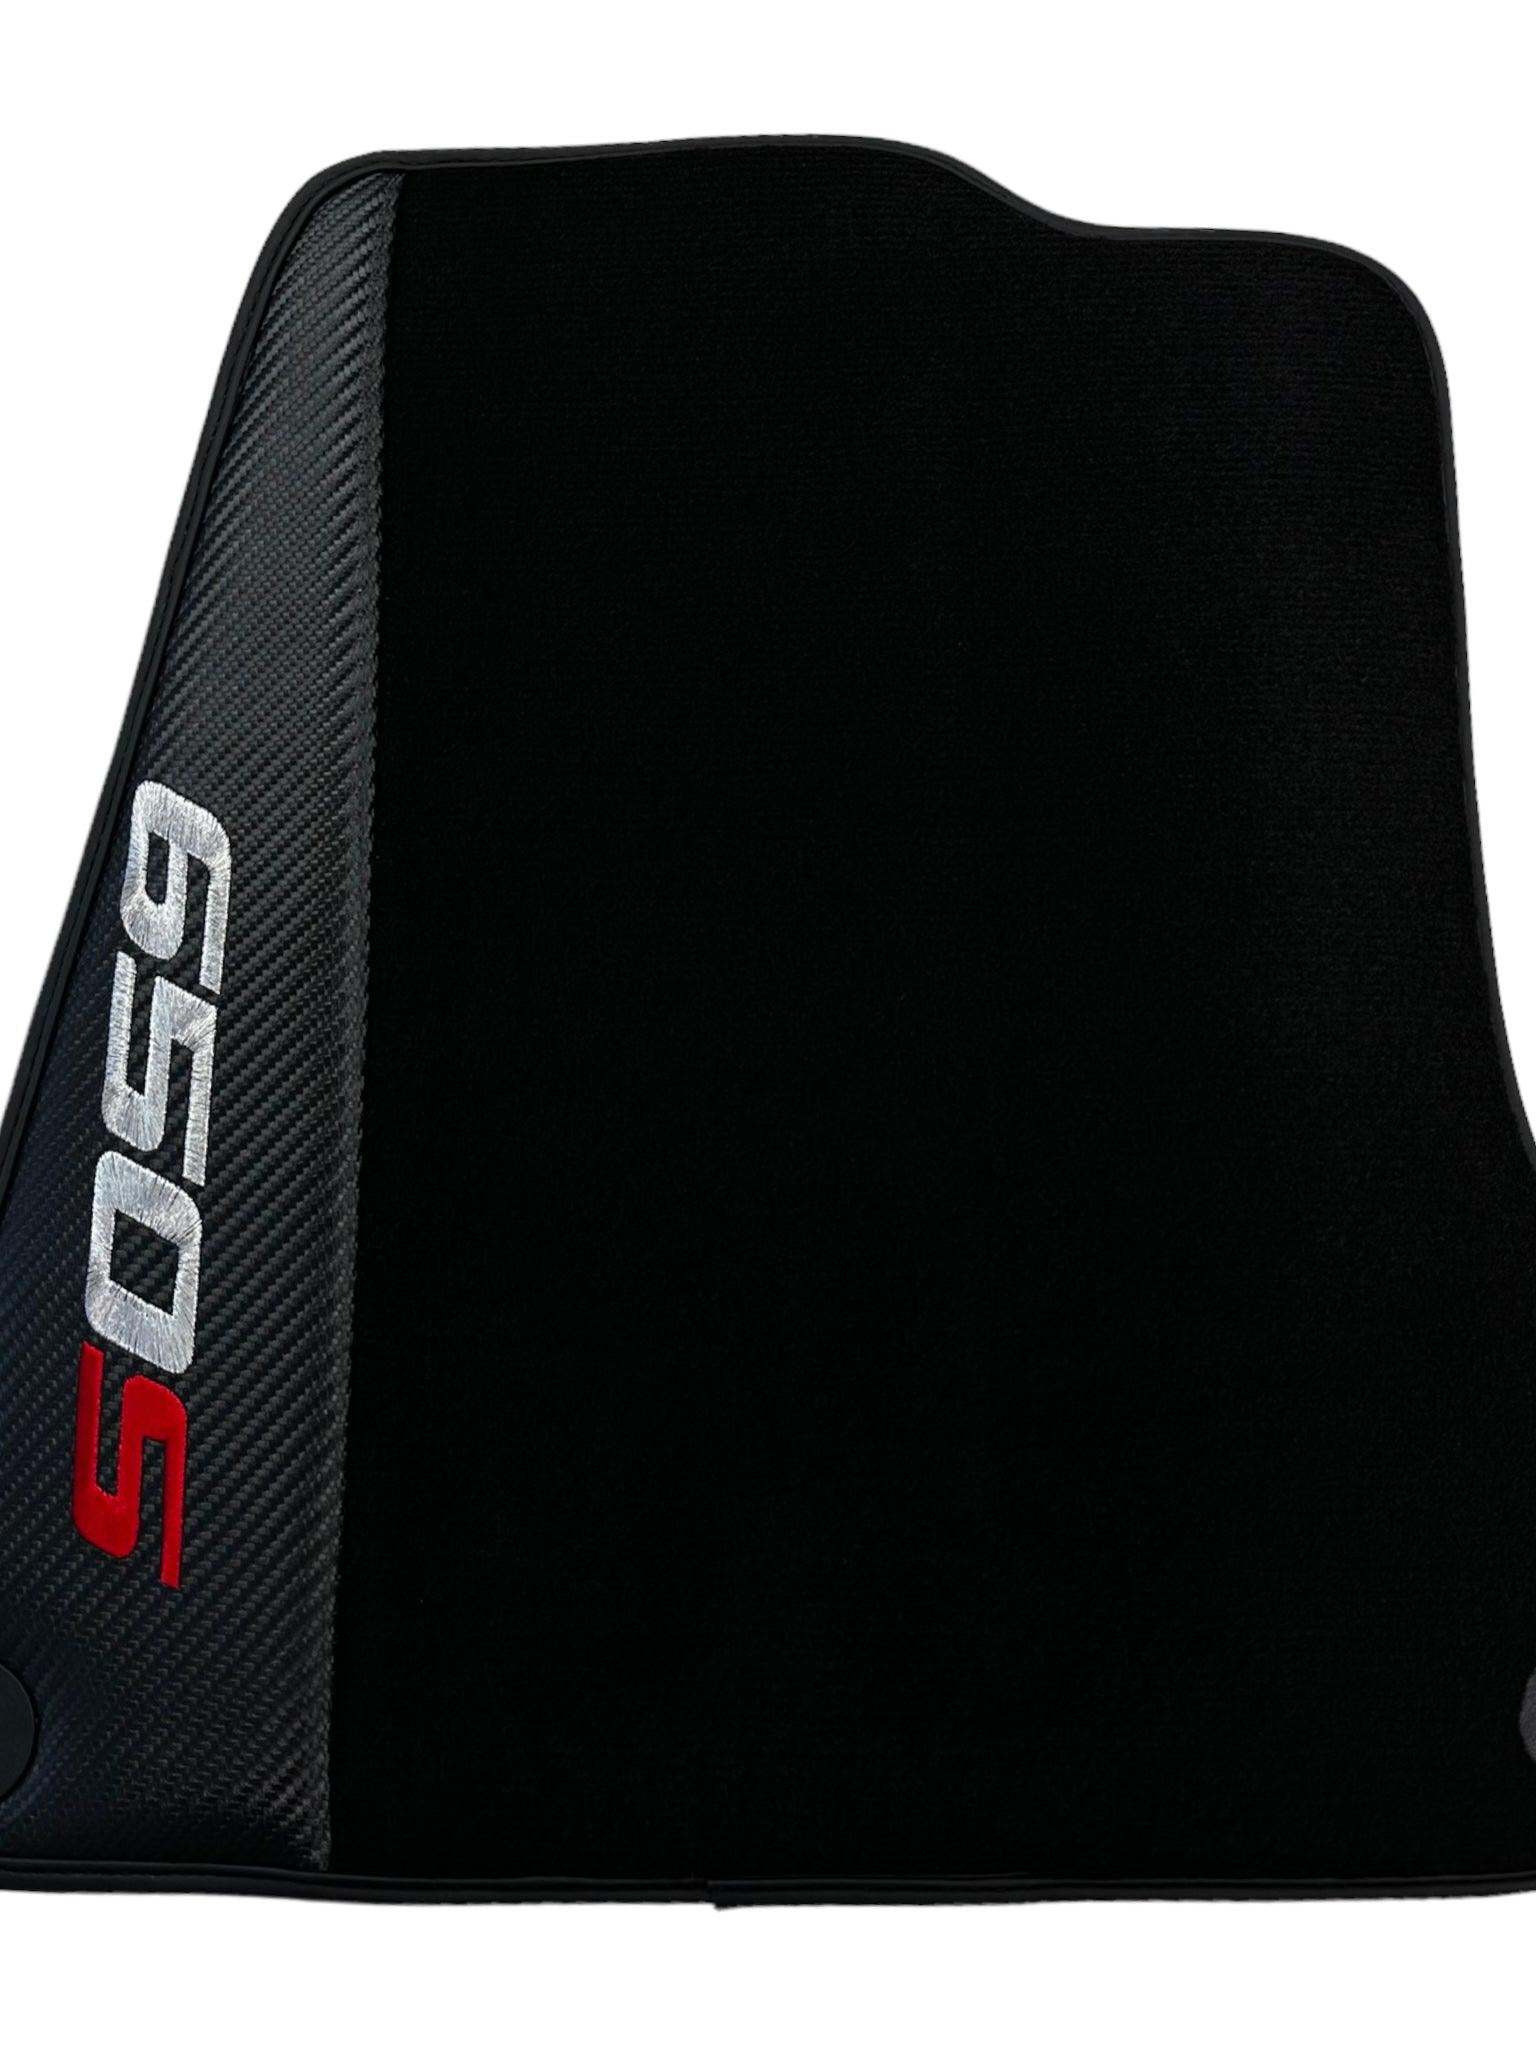 Black Floor Mats For McLaren 650S Black Tailored With Carbon Leather